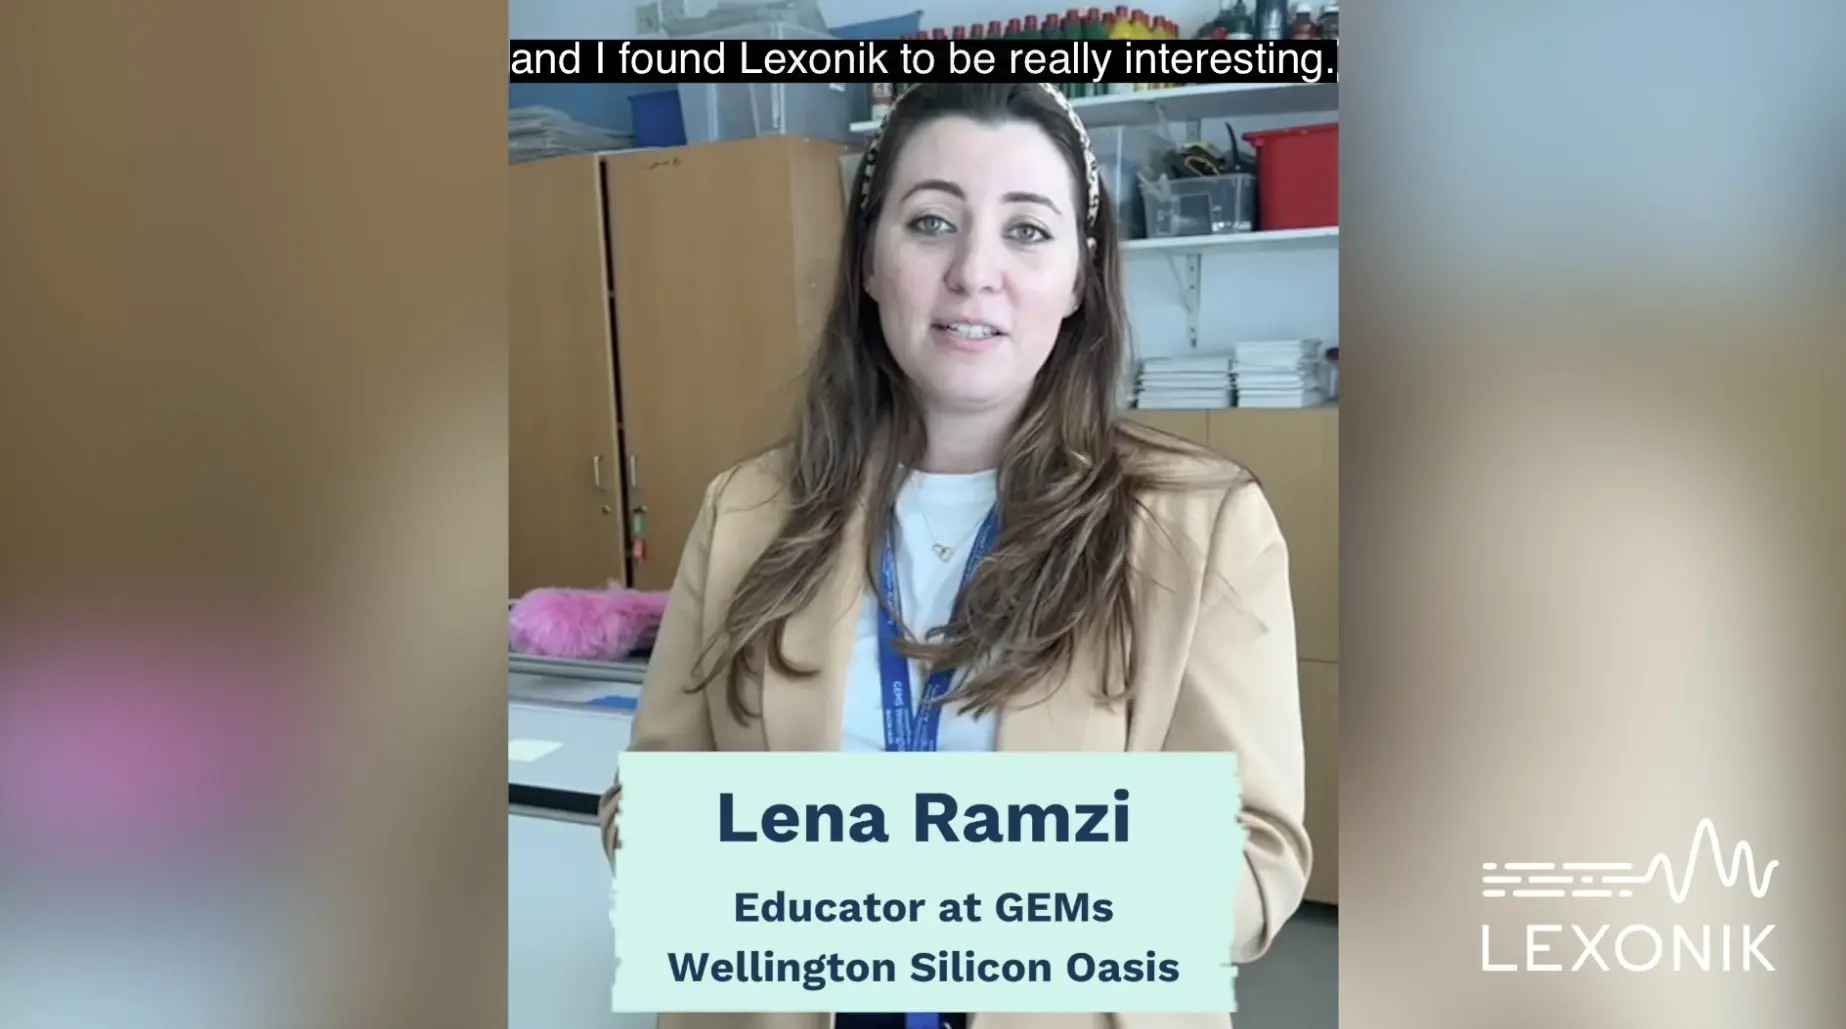 an educator from gems wellington silicon oasis giving a testimonial to camera